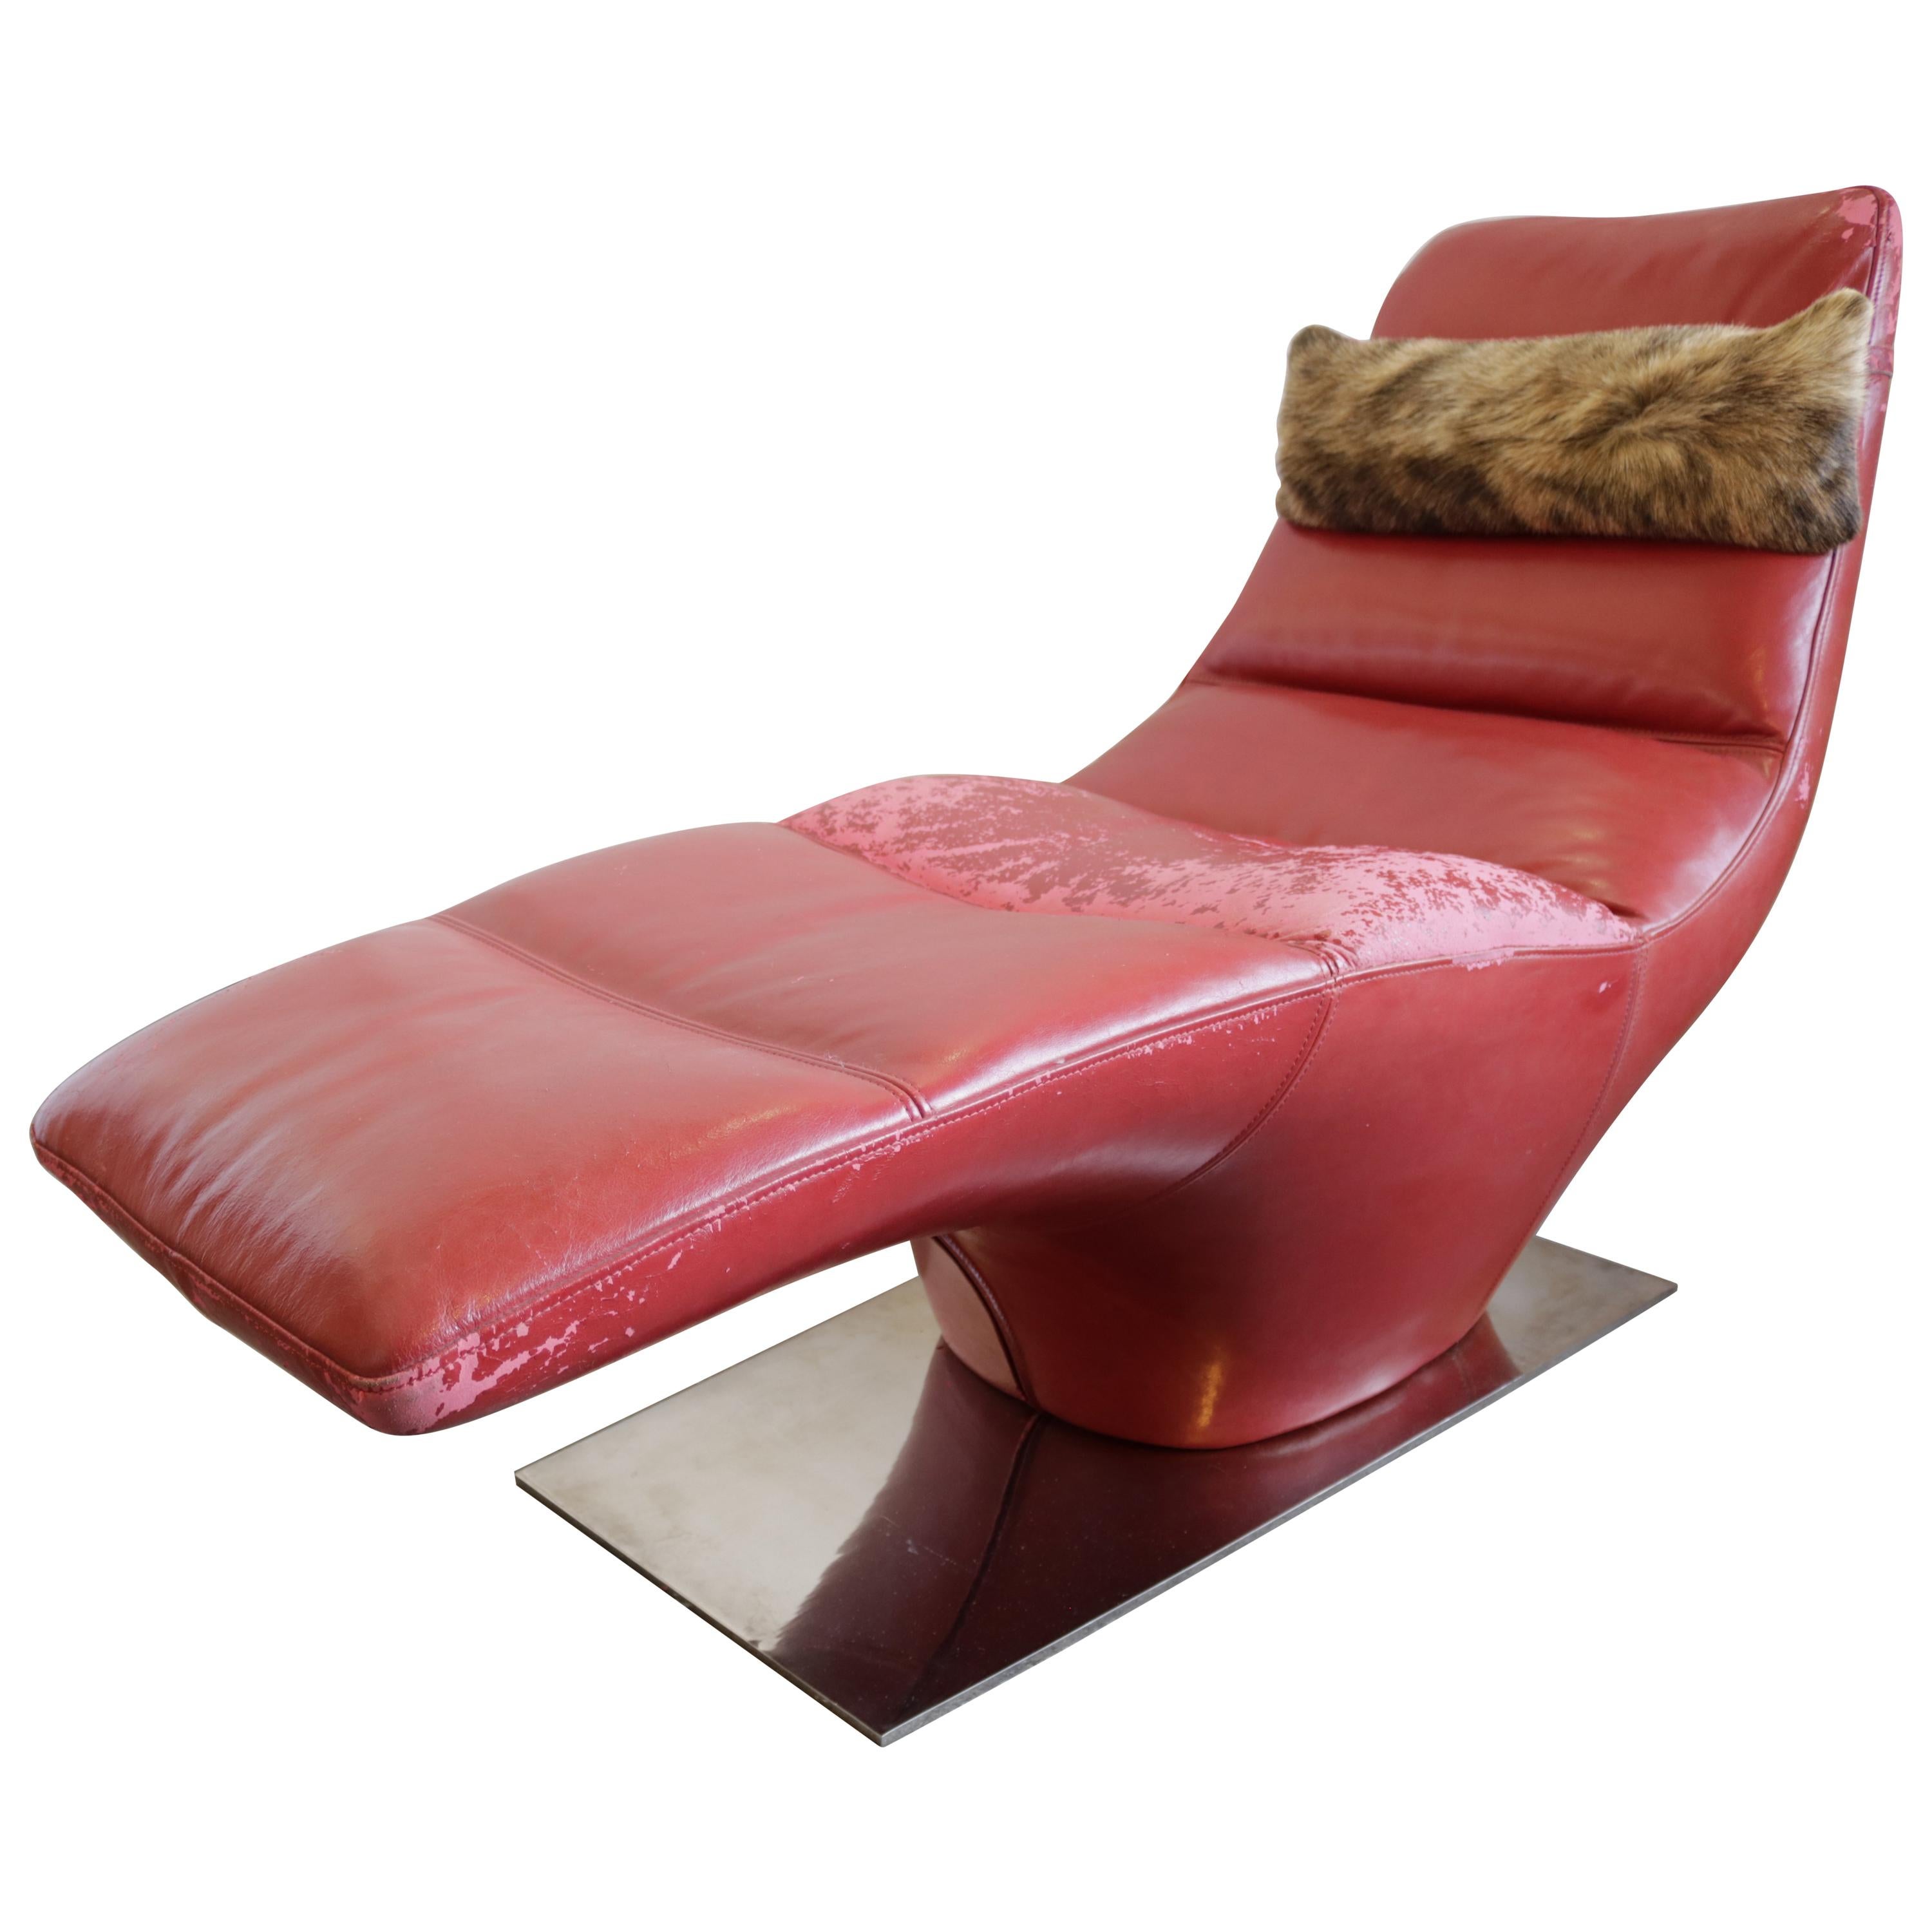 1970s Chaise Longue in the Manner of Milo Baughman